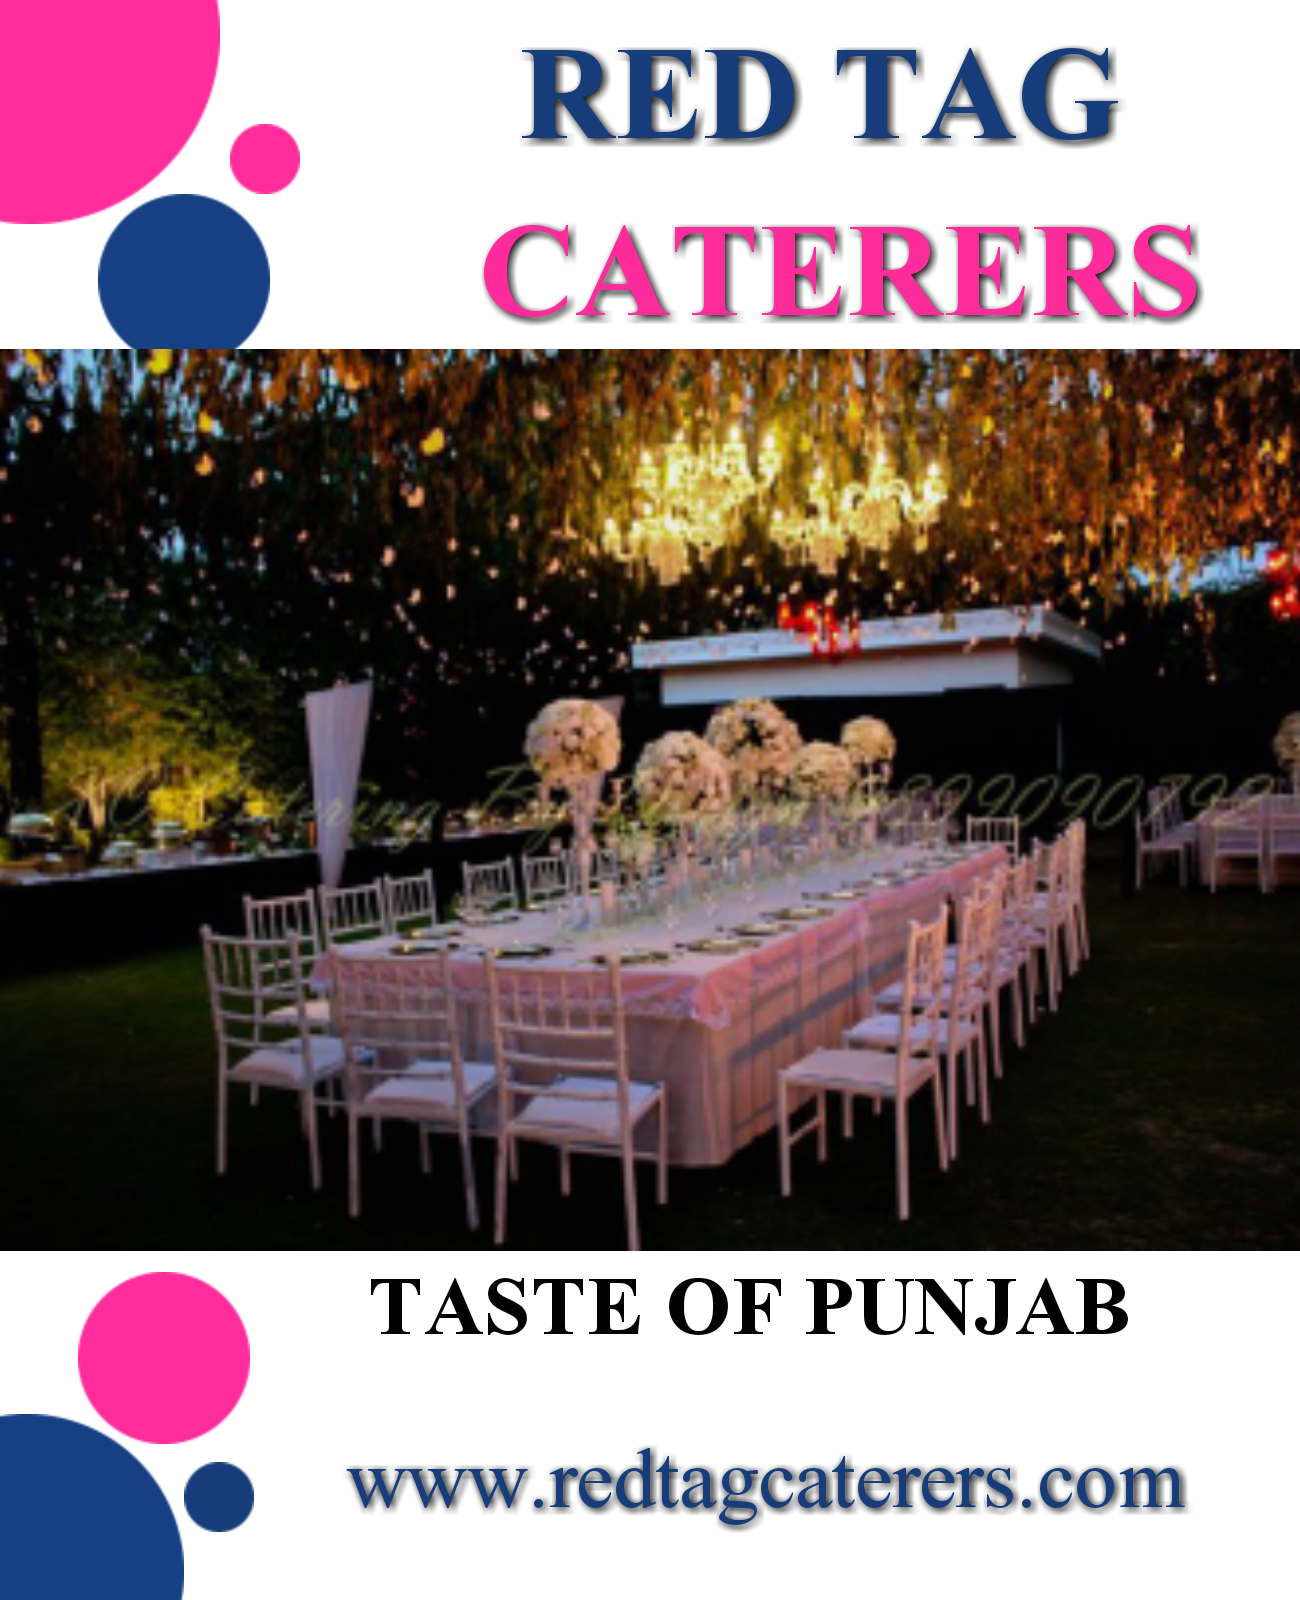 TOP 1 CATERERS IN LUDHIANA  | Red Tag Caterers | Top 1 caterers in Ludhiana, top catering service in Ludhiana, top quality food in Ludhiana, best caterers in Ludhiana, hygienic food in Ludhiana  - GL44313